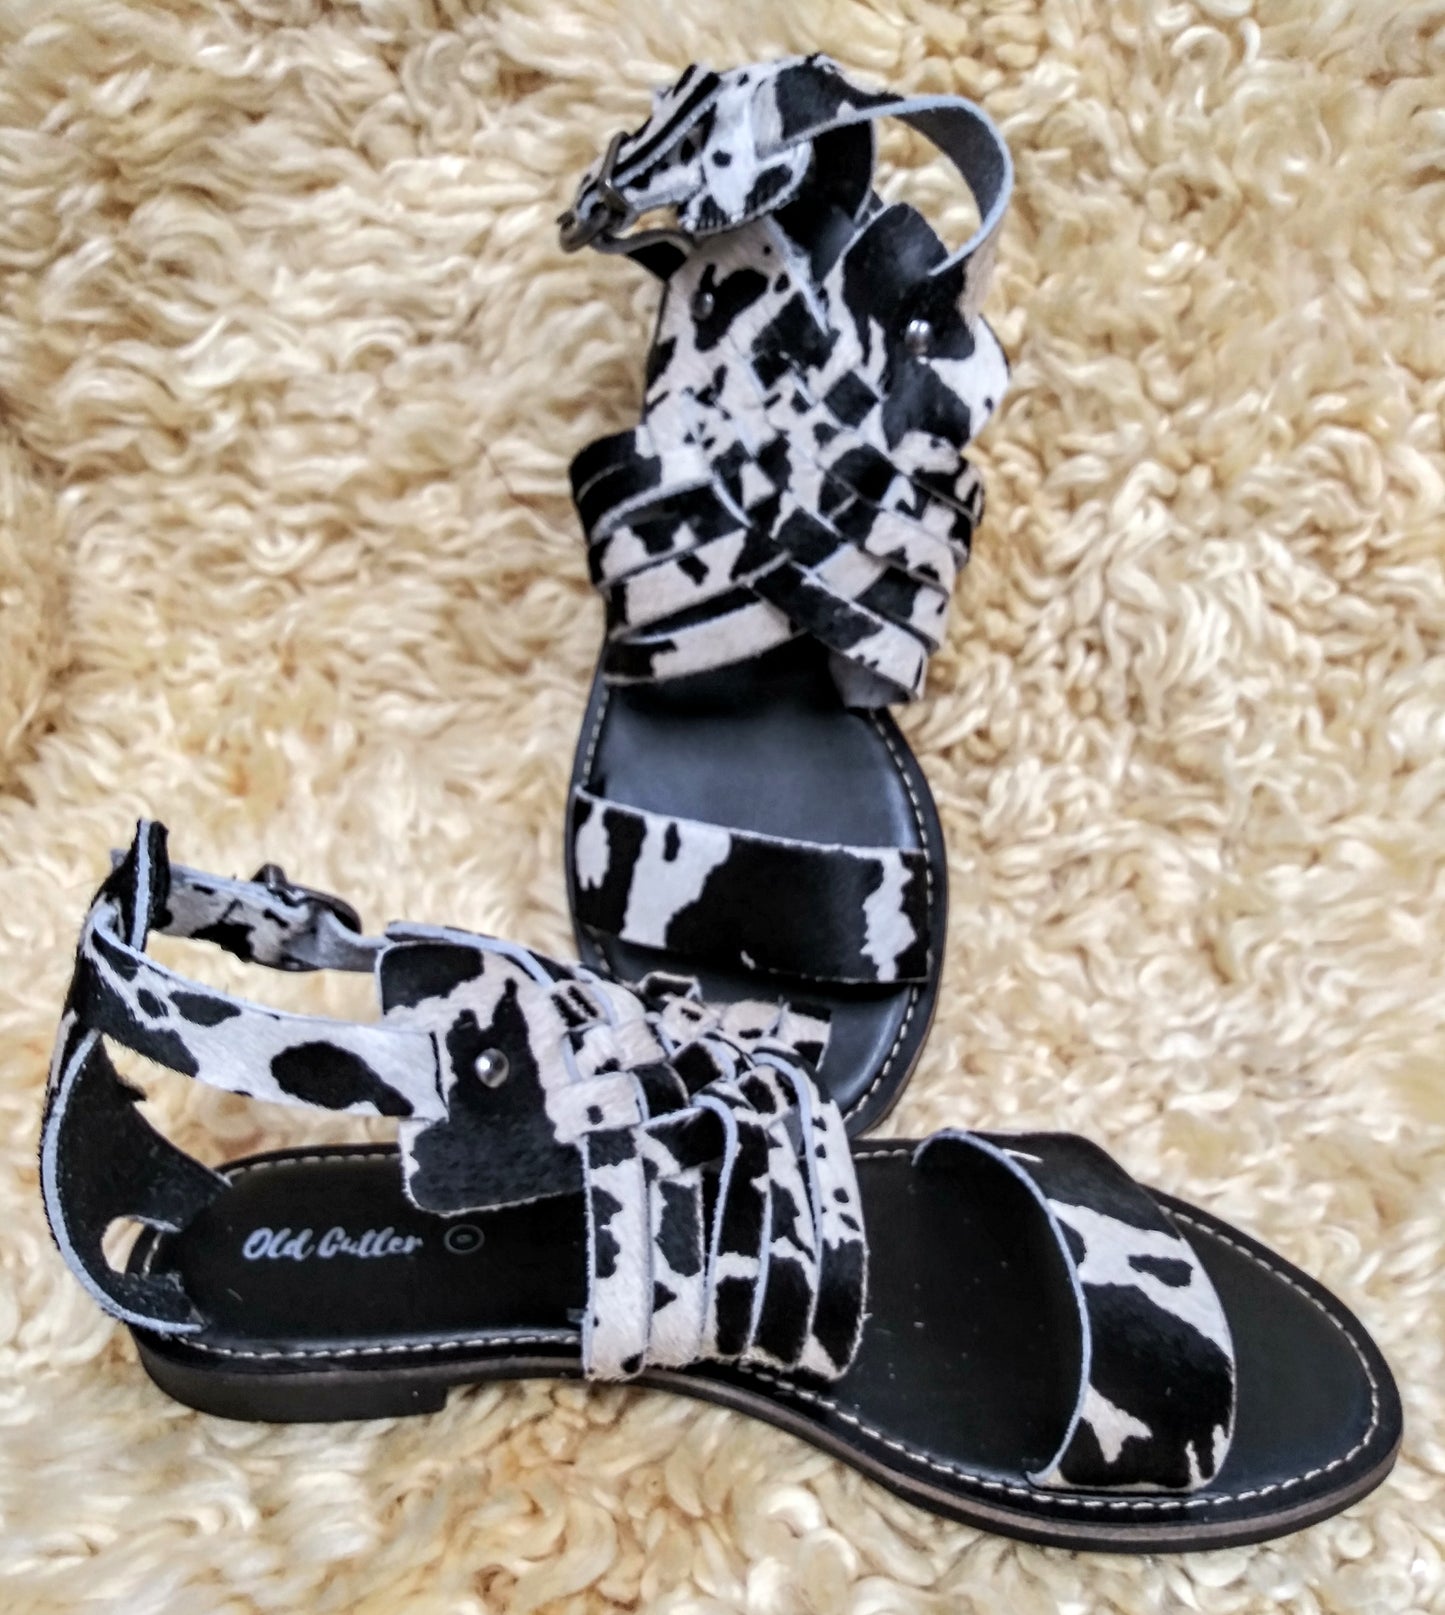 Miami Shoes LOLA-3 in Black and White Cow Print